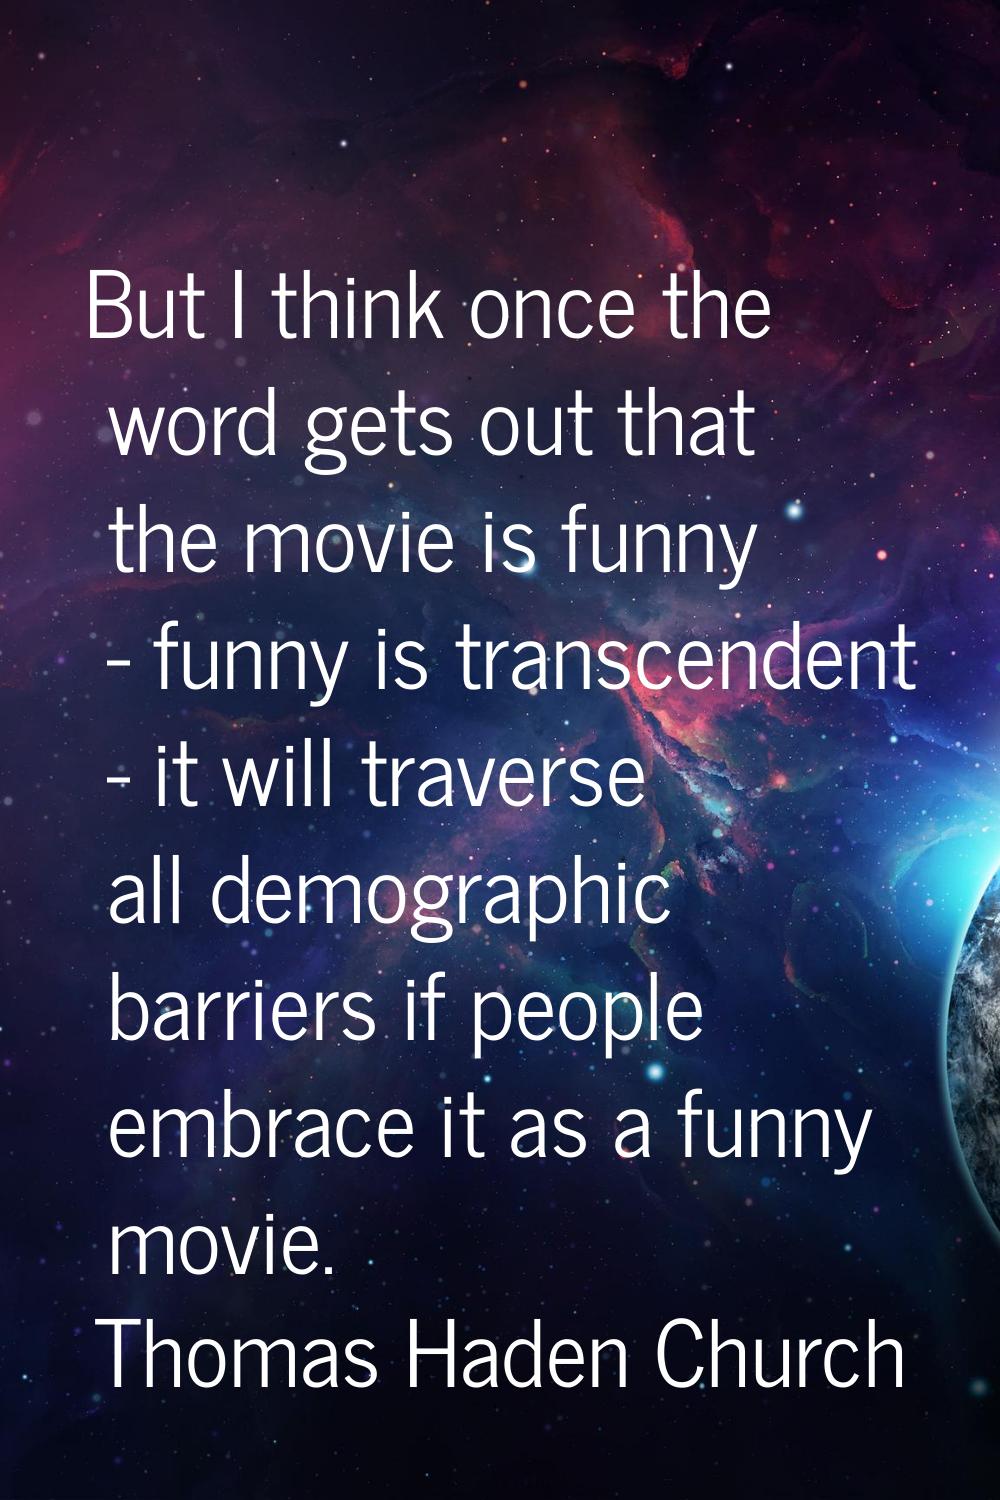 But I think once the word gets out that the movie is funny - funny is transcendent - it will traver